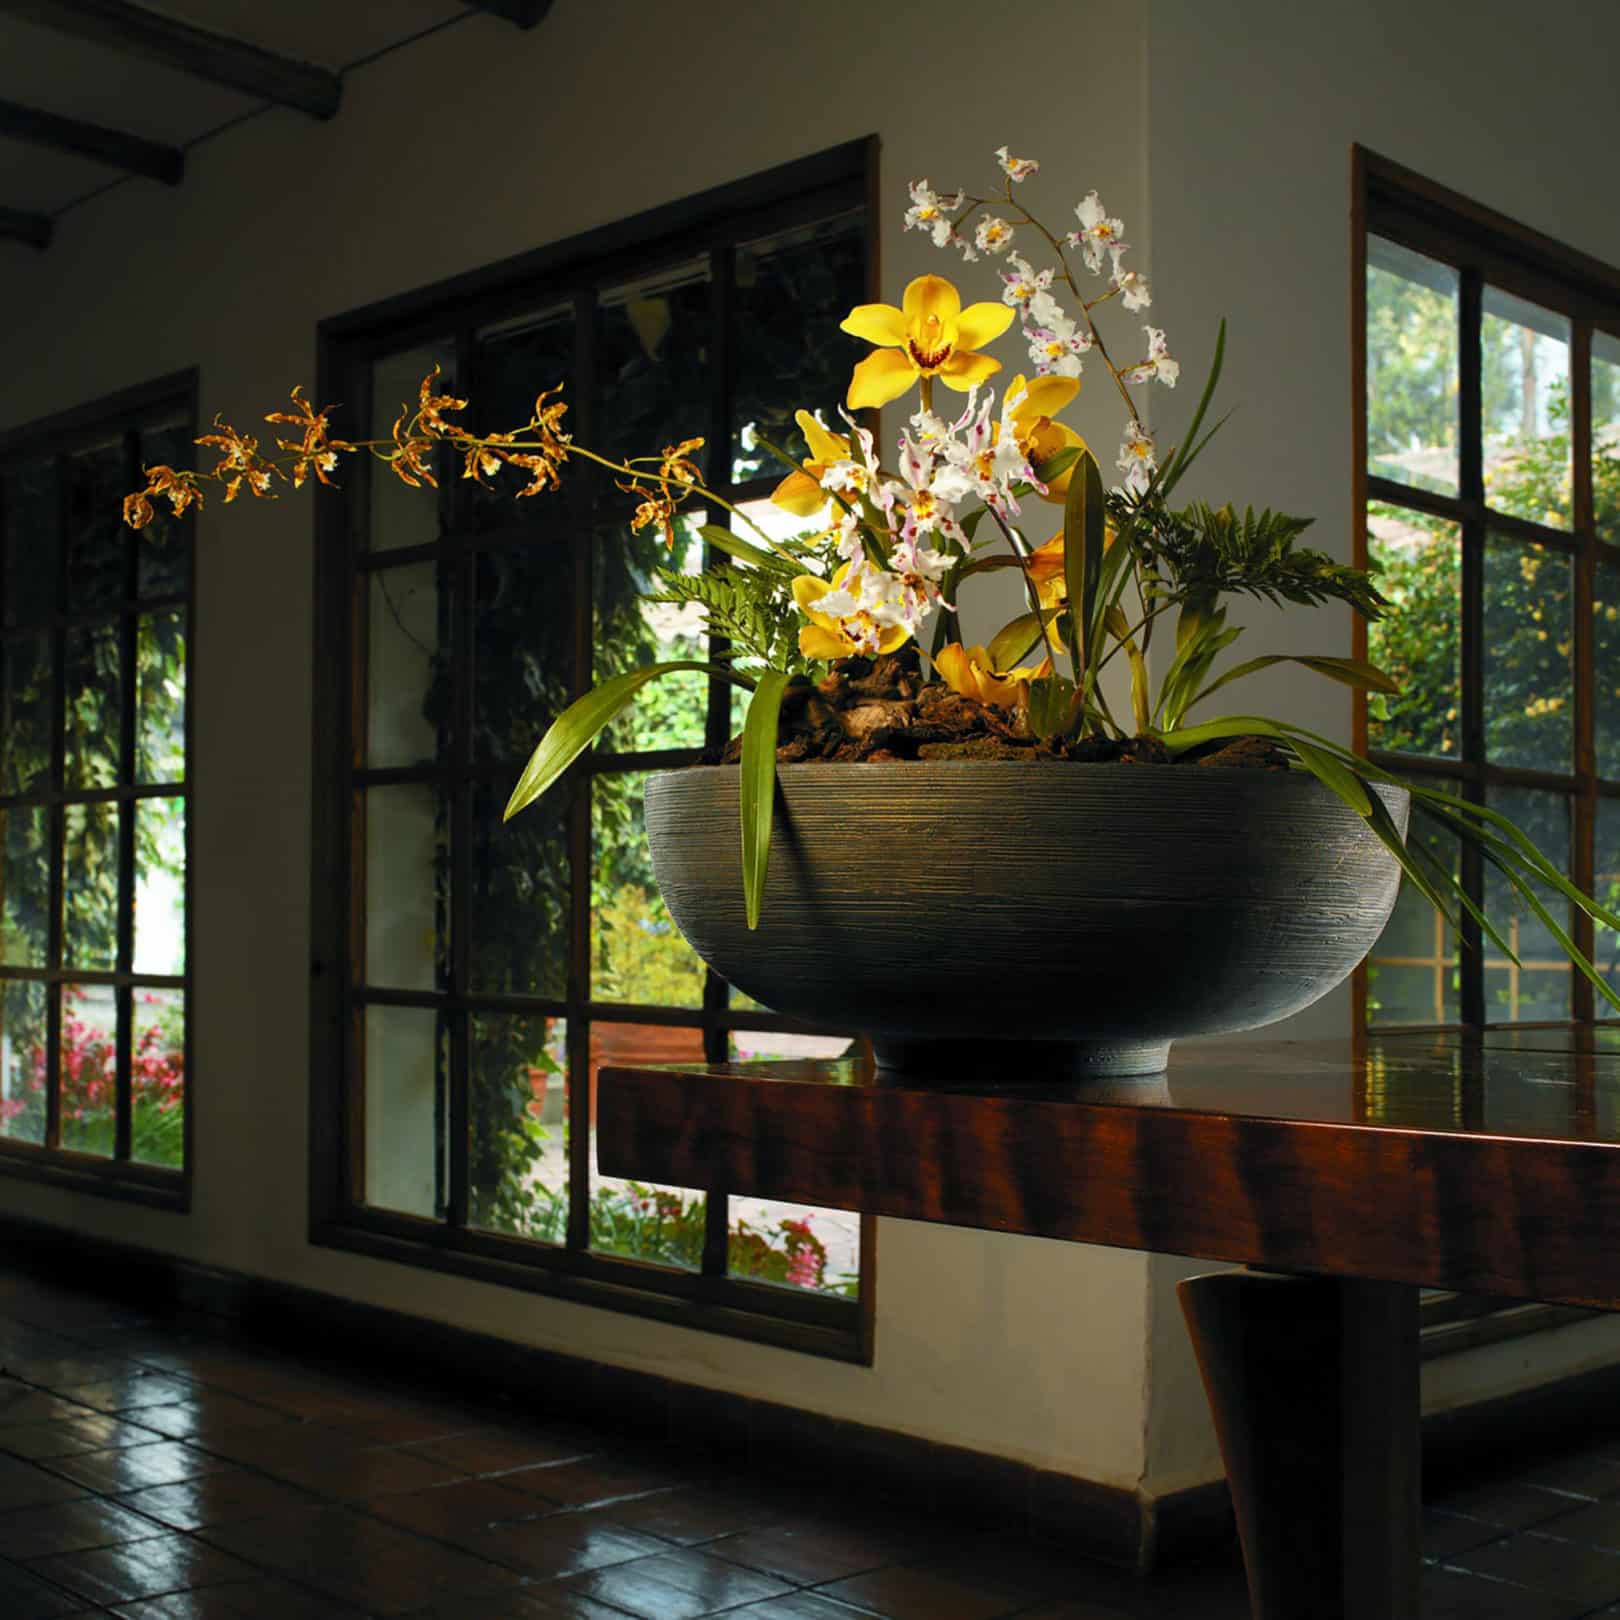 Orchid Display in Orinoco Bowl